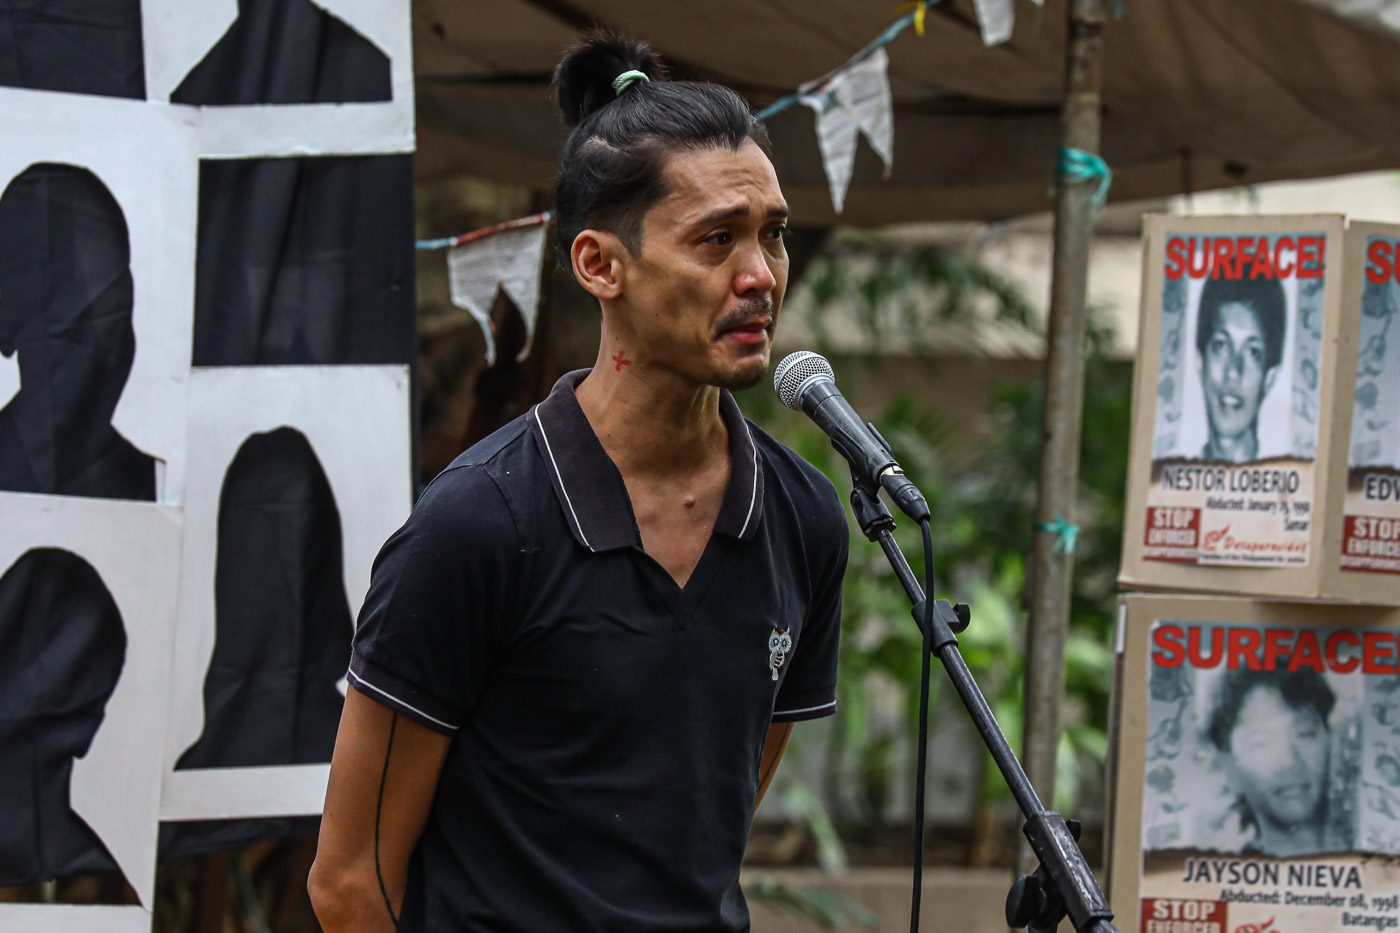 Adora de Vera’s son: Our fight is for all political prisoners in the country